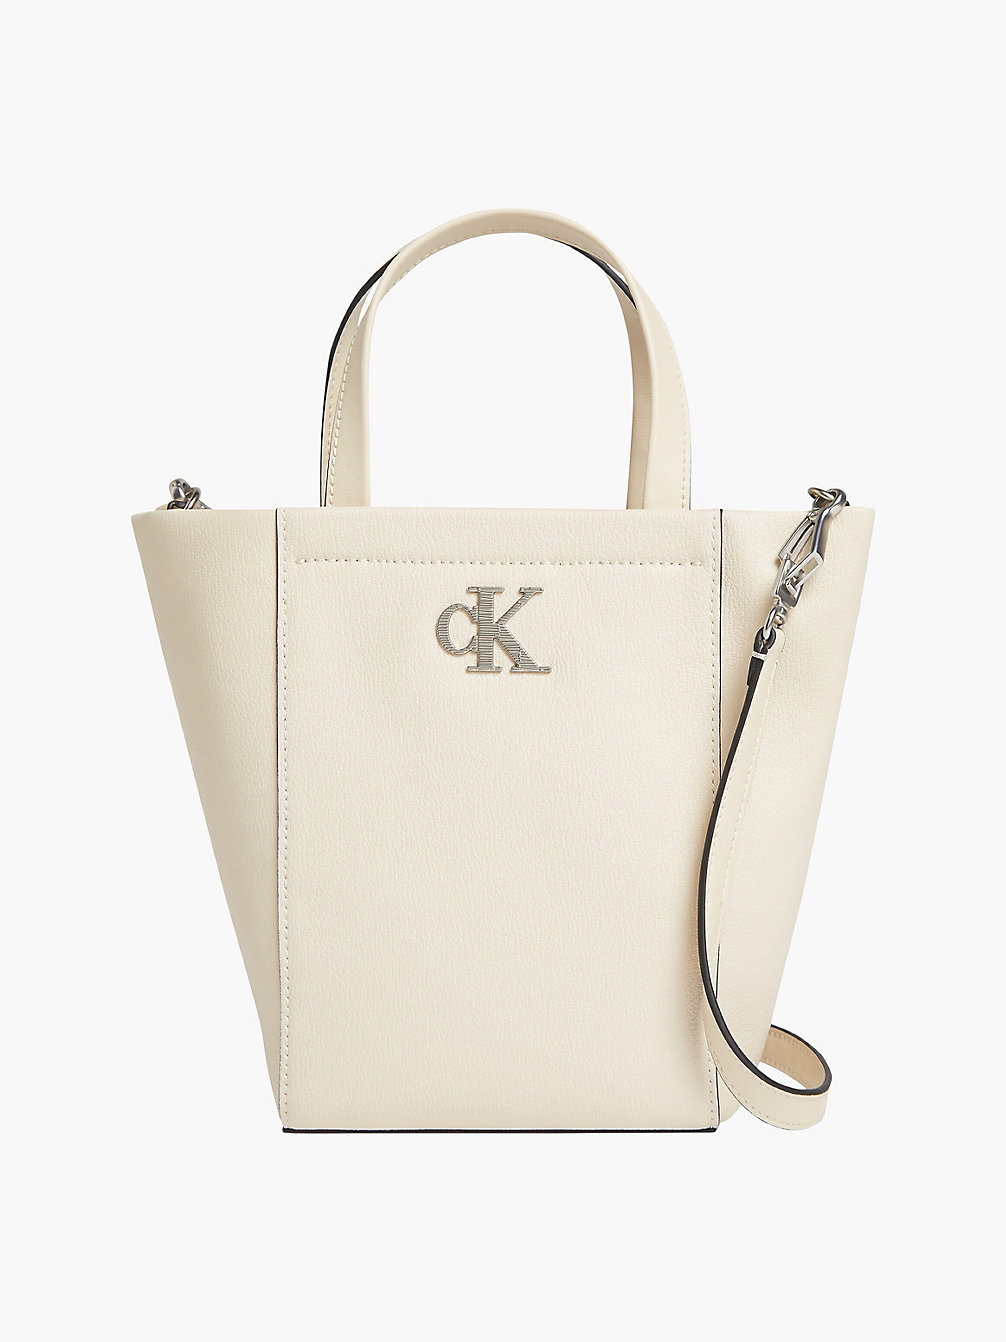 TUSCAN BEIGE Recycled Tote Bag undefined women Calvin Klein